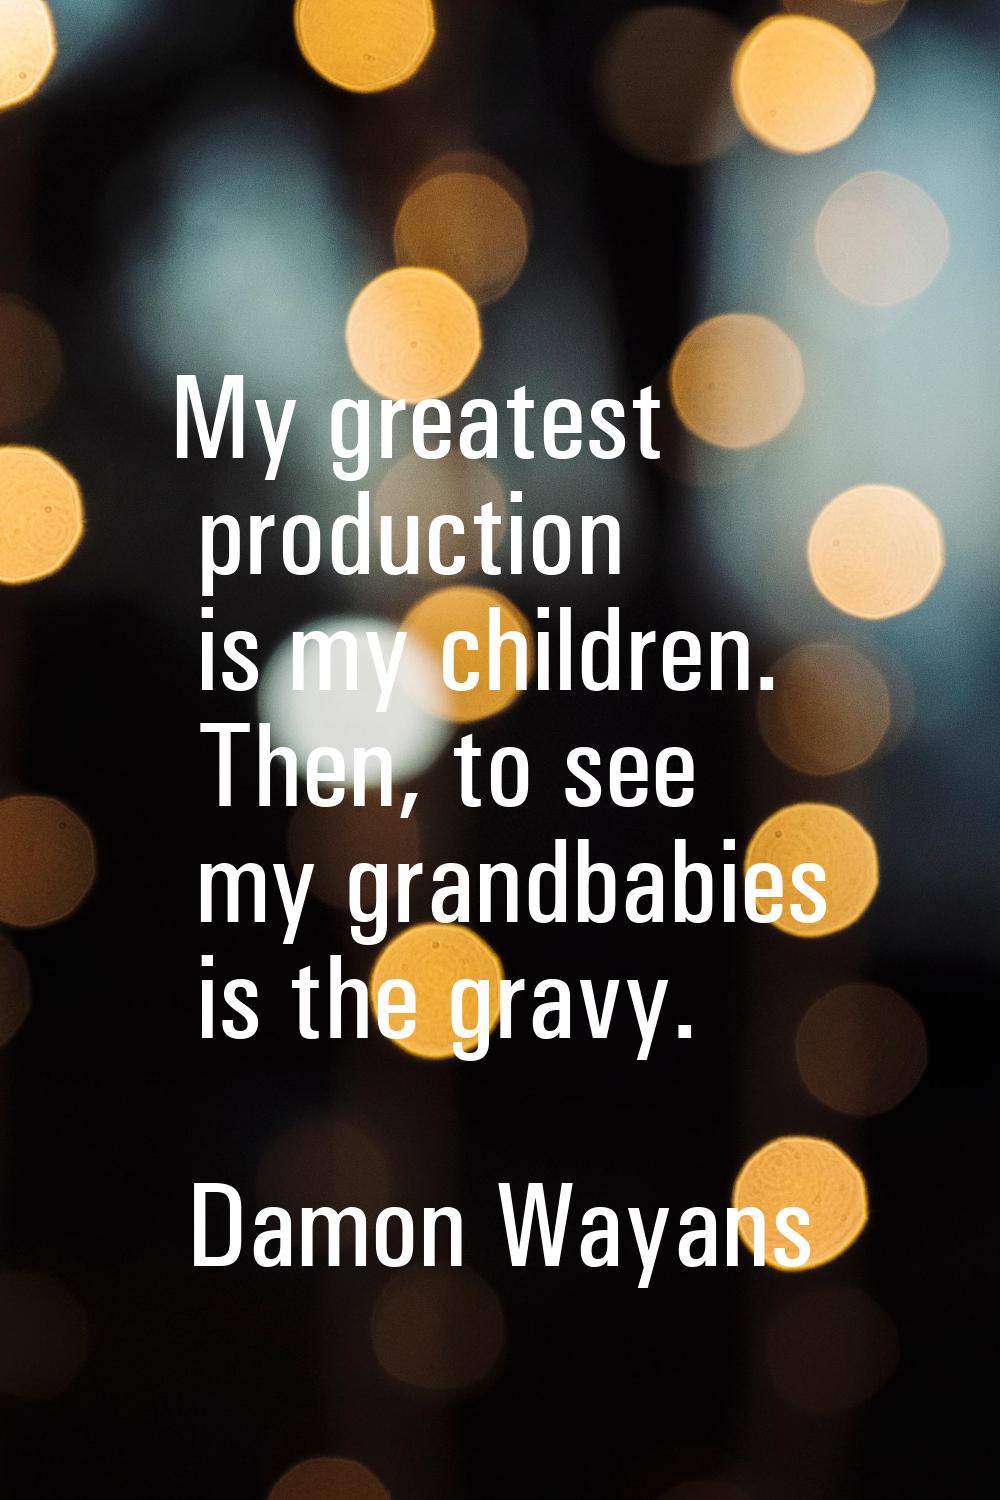 My greatest production is my children. Then, to see my grandbabies is the gravy.